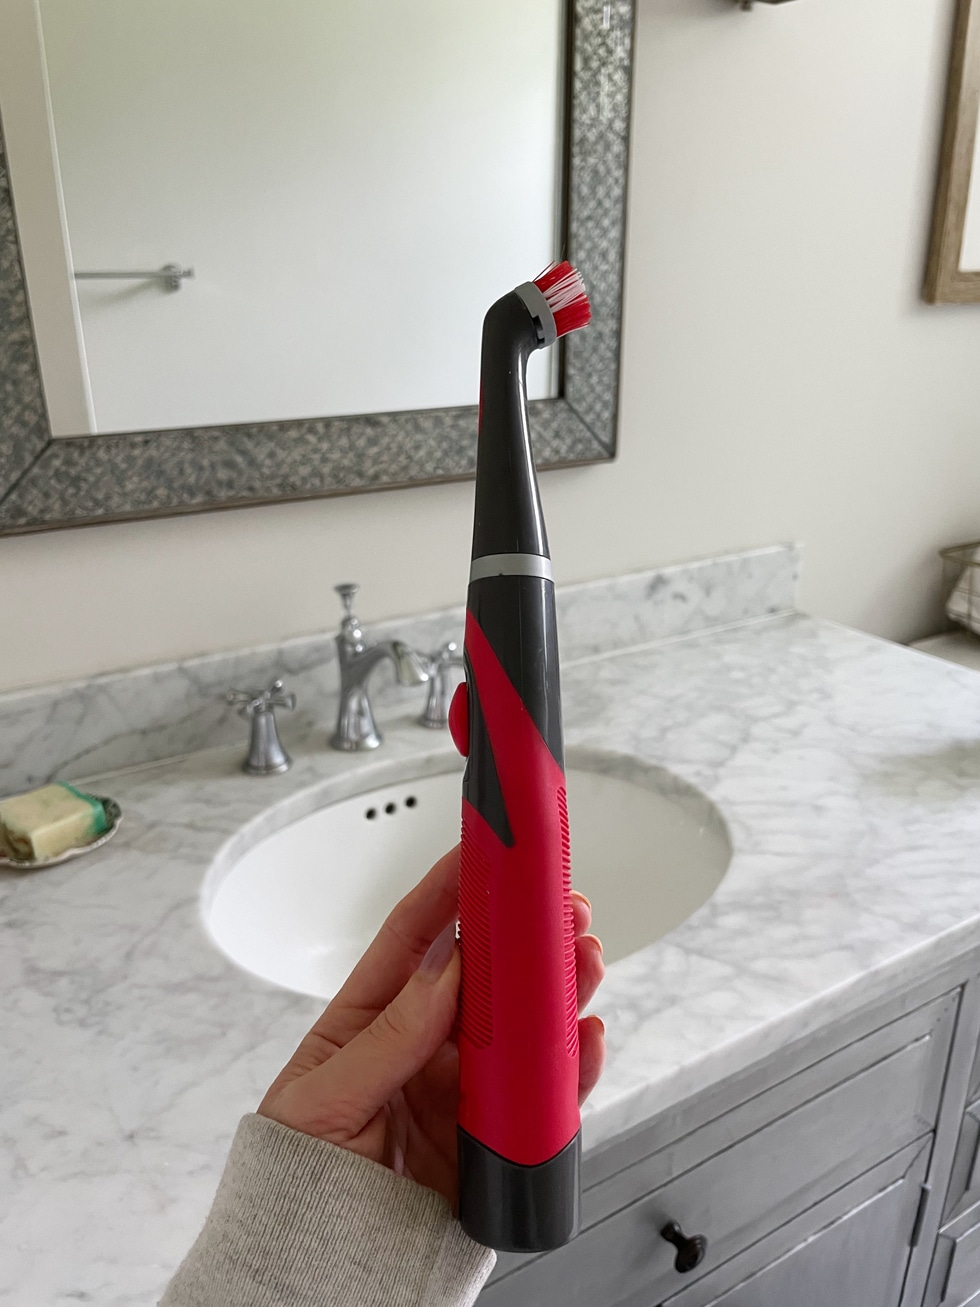 My Favorite Cleaning Tools and Gadgets That Make Life Easier!